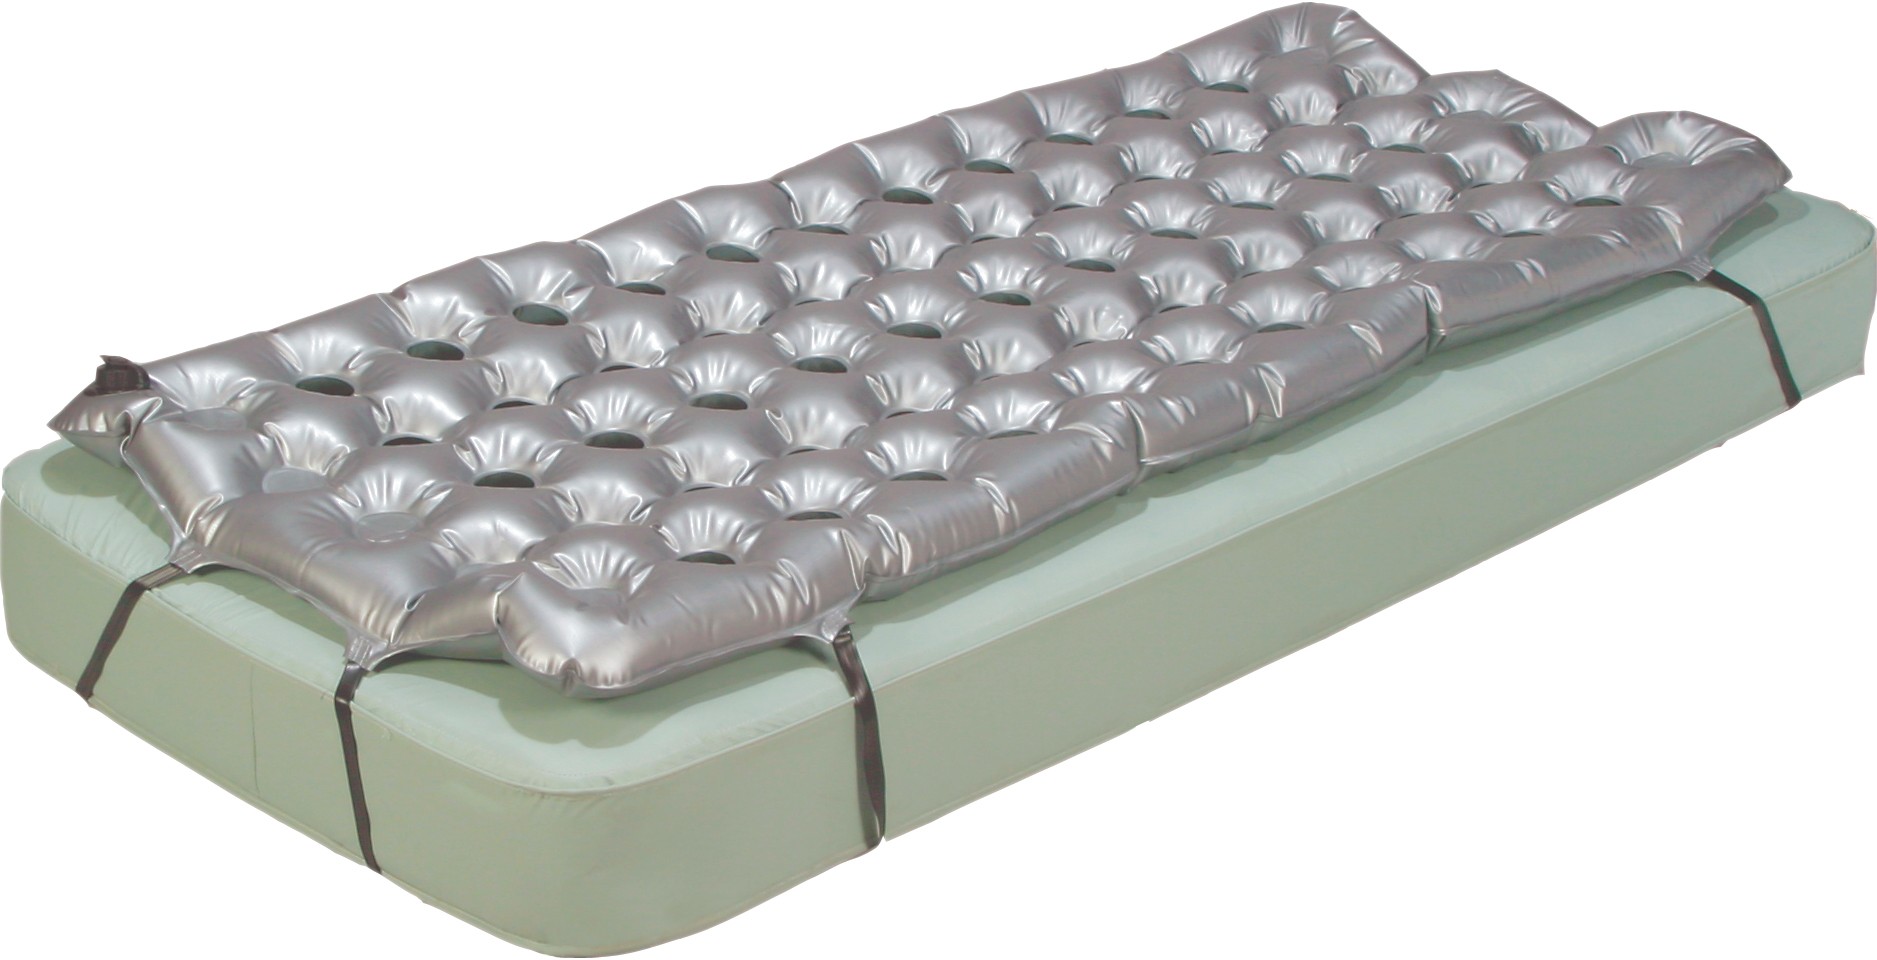 Premium Guard - Static Air Mattress Overlay is in stock and available at On The Mend Medical Supply & Equipment